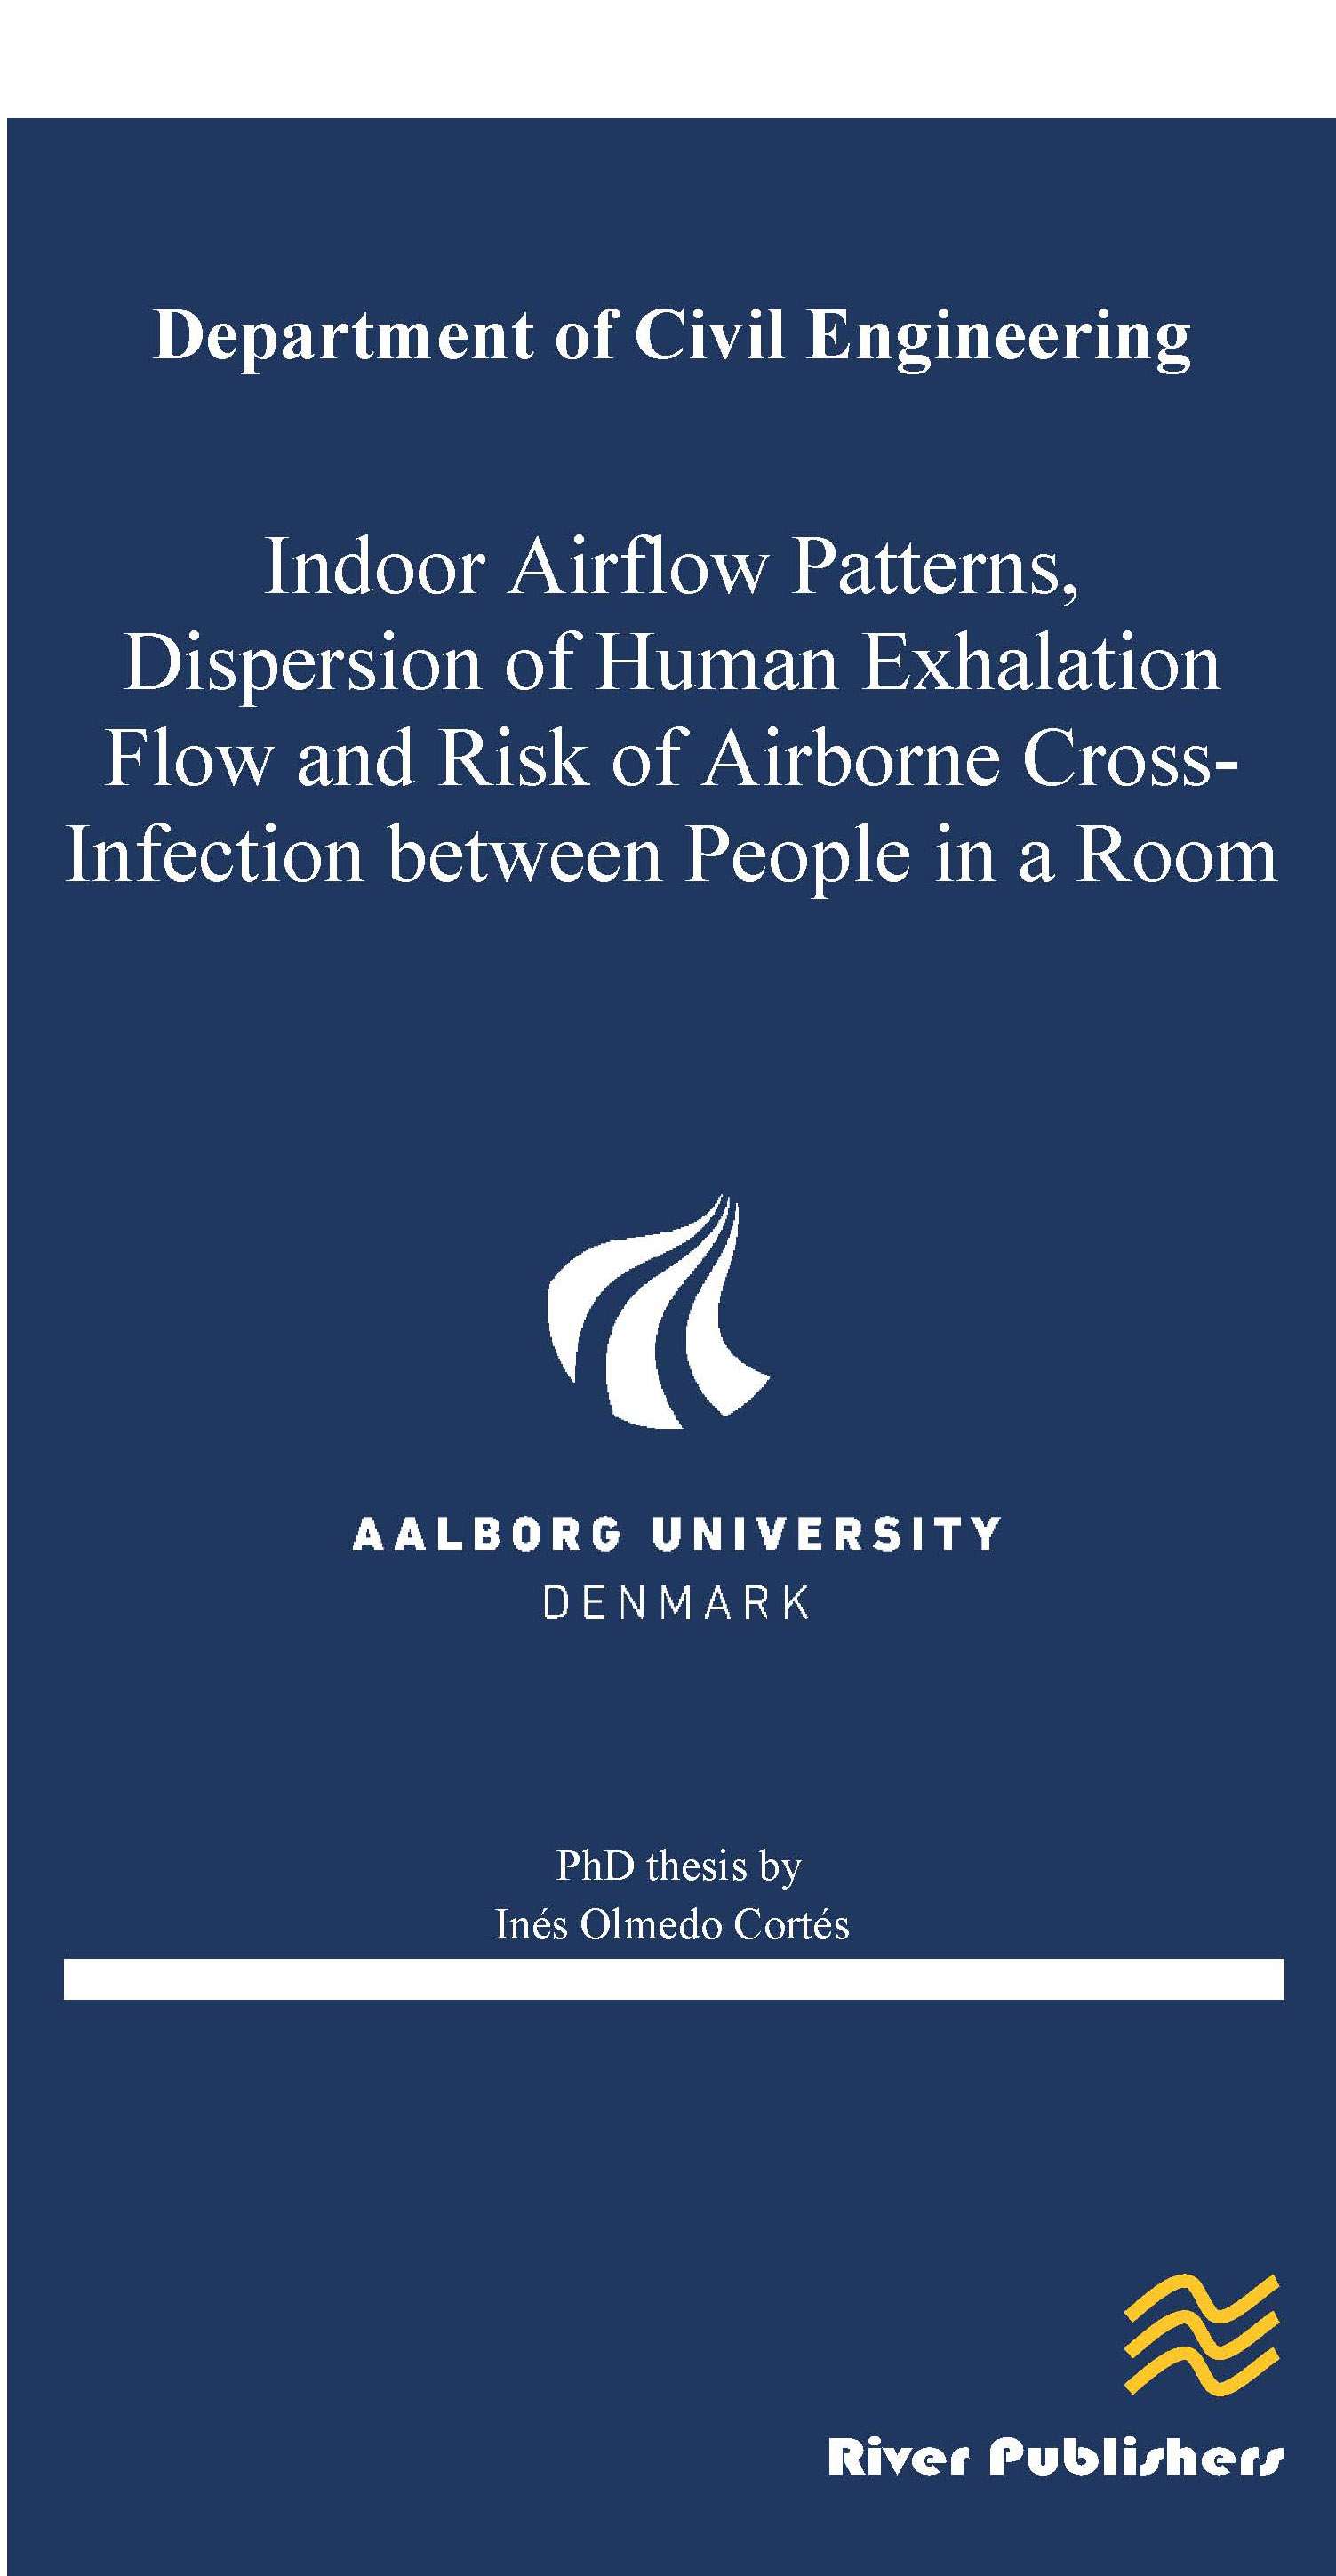 Indoor Airflow Patterns, Dispersion of Human Exhalation Flow and Risk of Airborne Cross-Infection between People in a Room